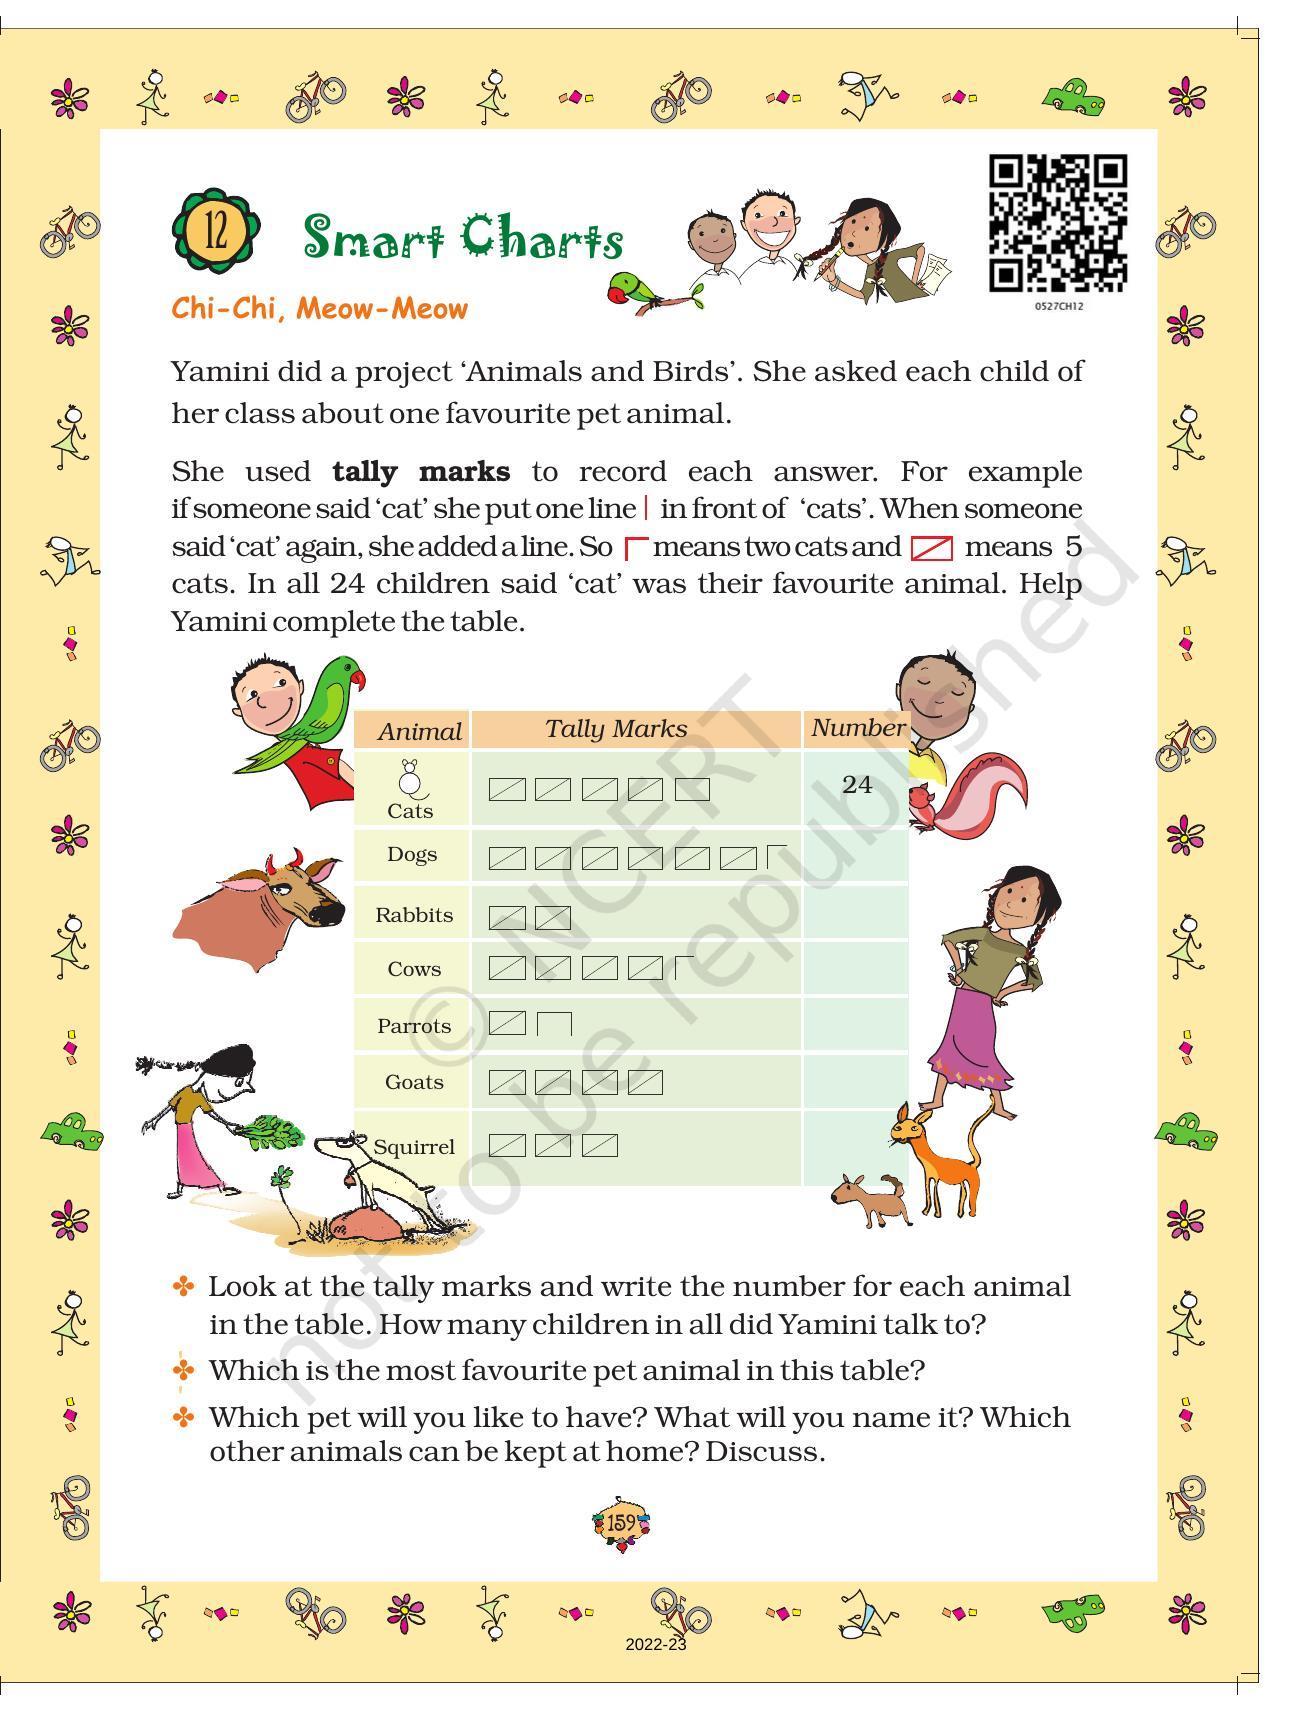 NCERT Book for Class 5 Maths Chapter 12 Smart Charts - Page 1